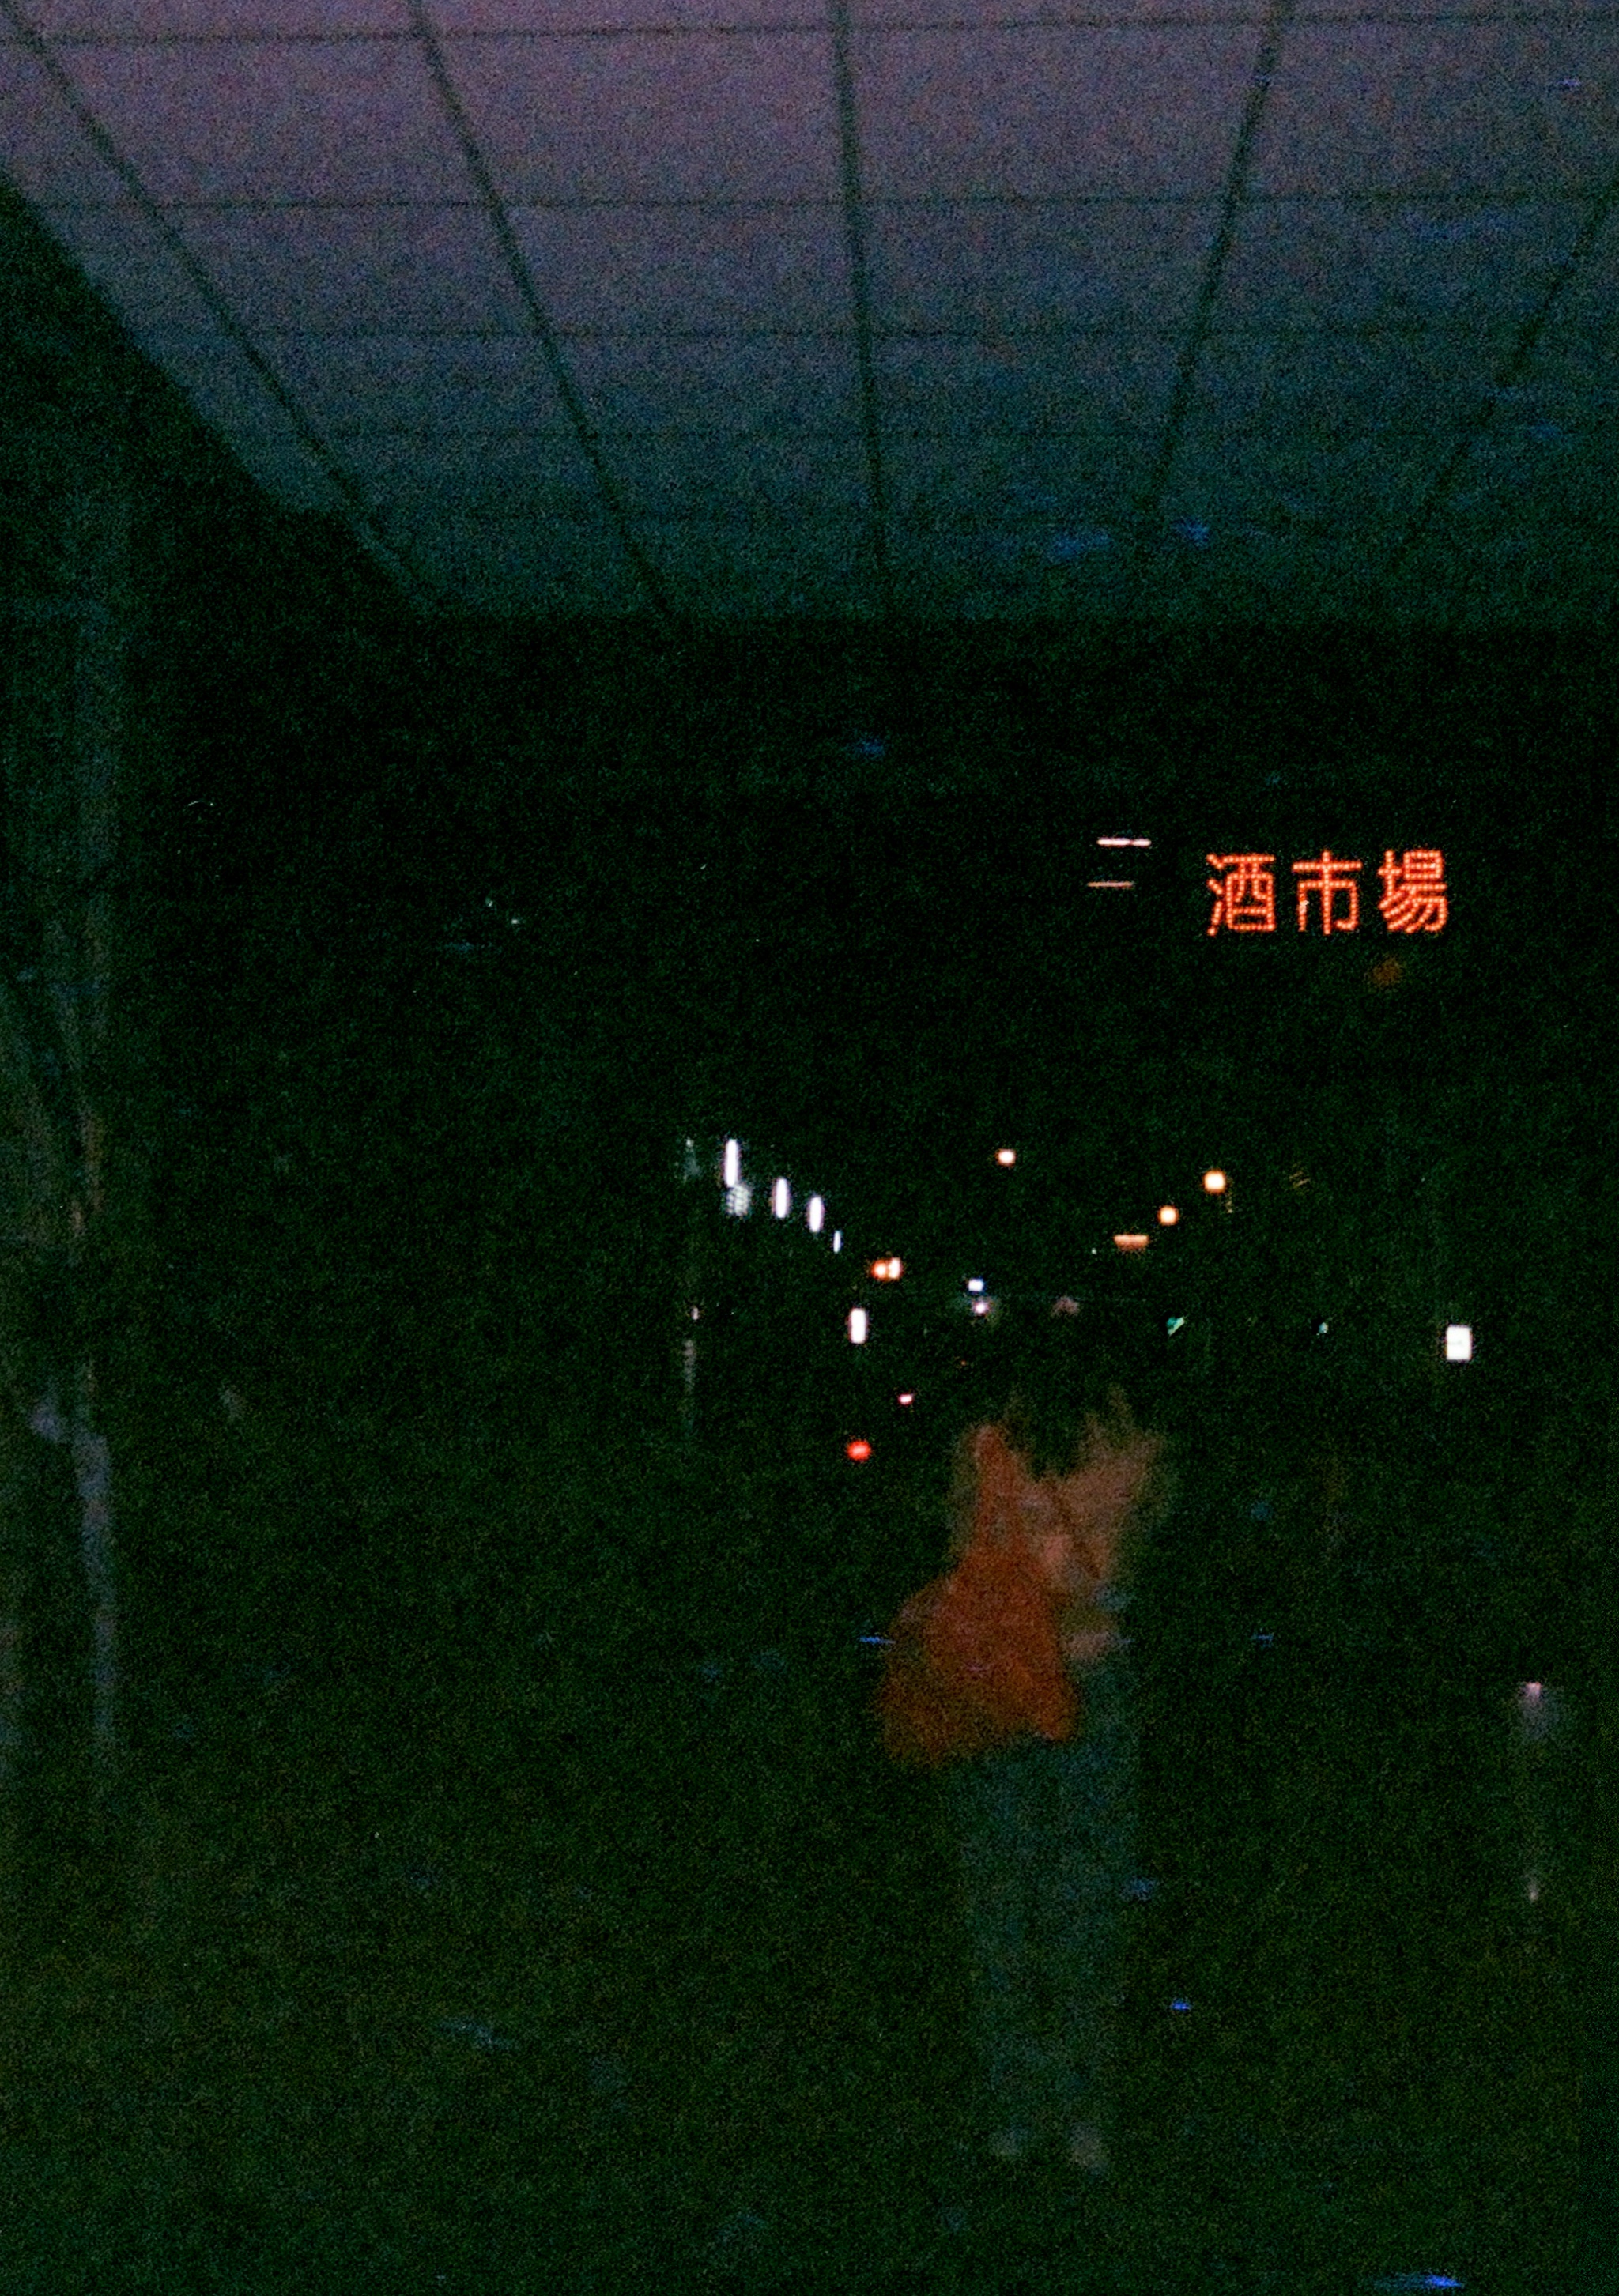 a person walking in a dark alley with a neon sign for Wine Market above them